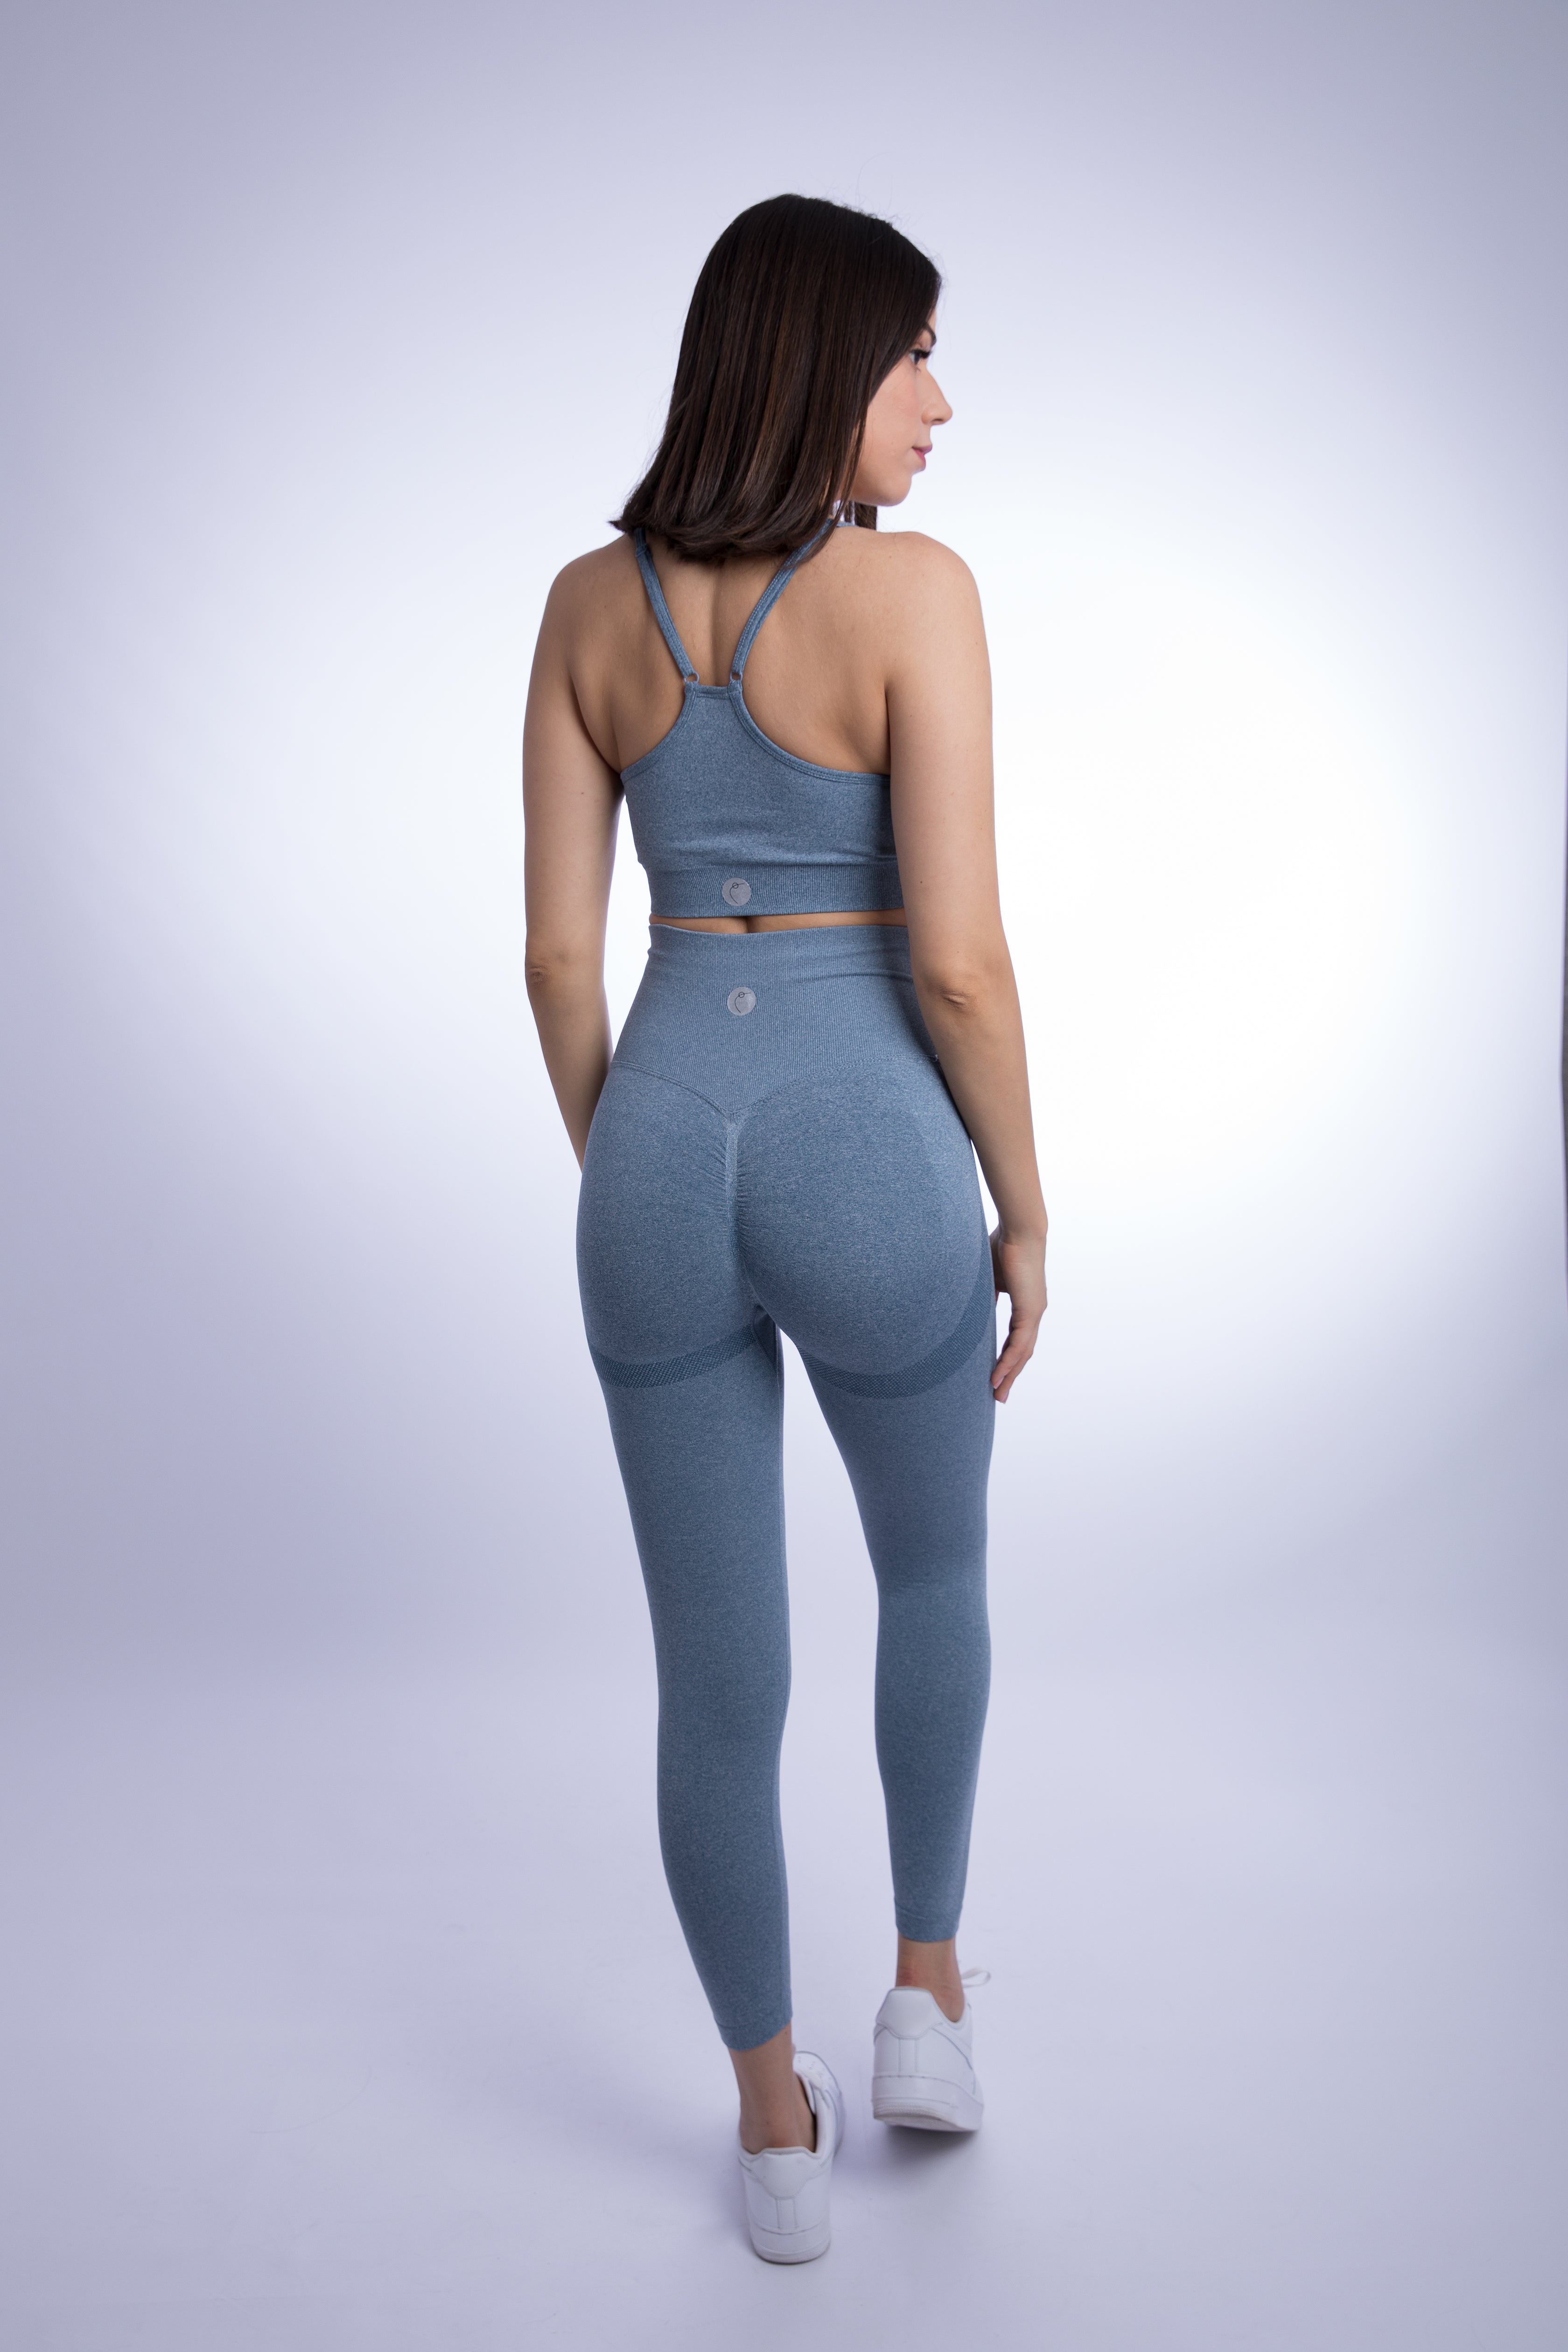 Jasmine Seamless Set with Crop Strap Top and Legging